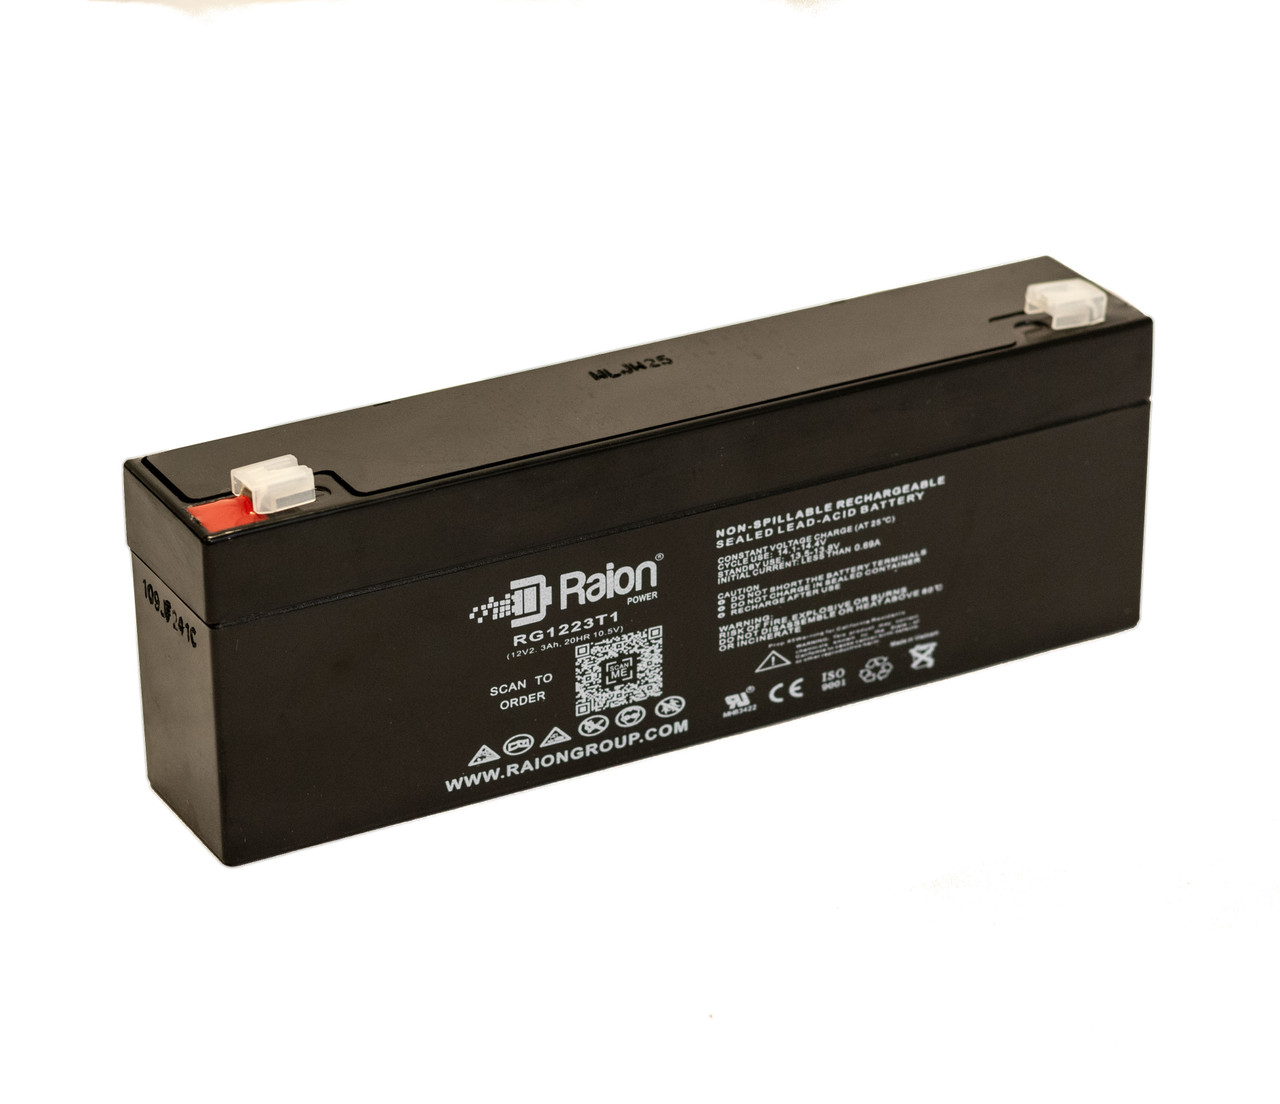 Raion Power RG1223T1 Replacement Battery for Delta DT 12022